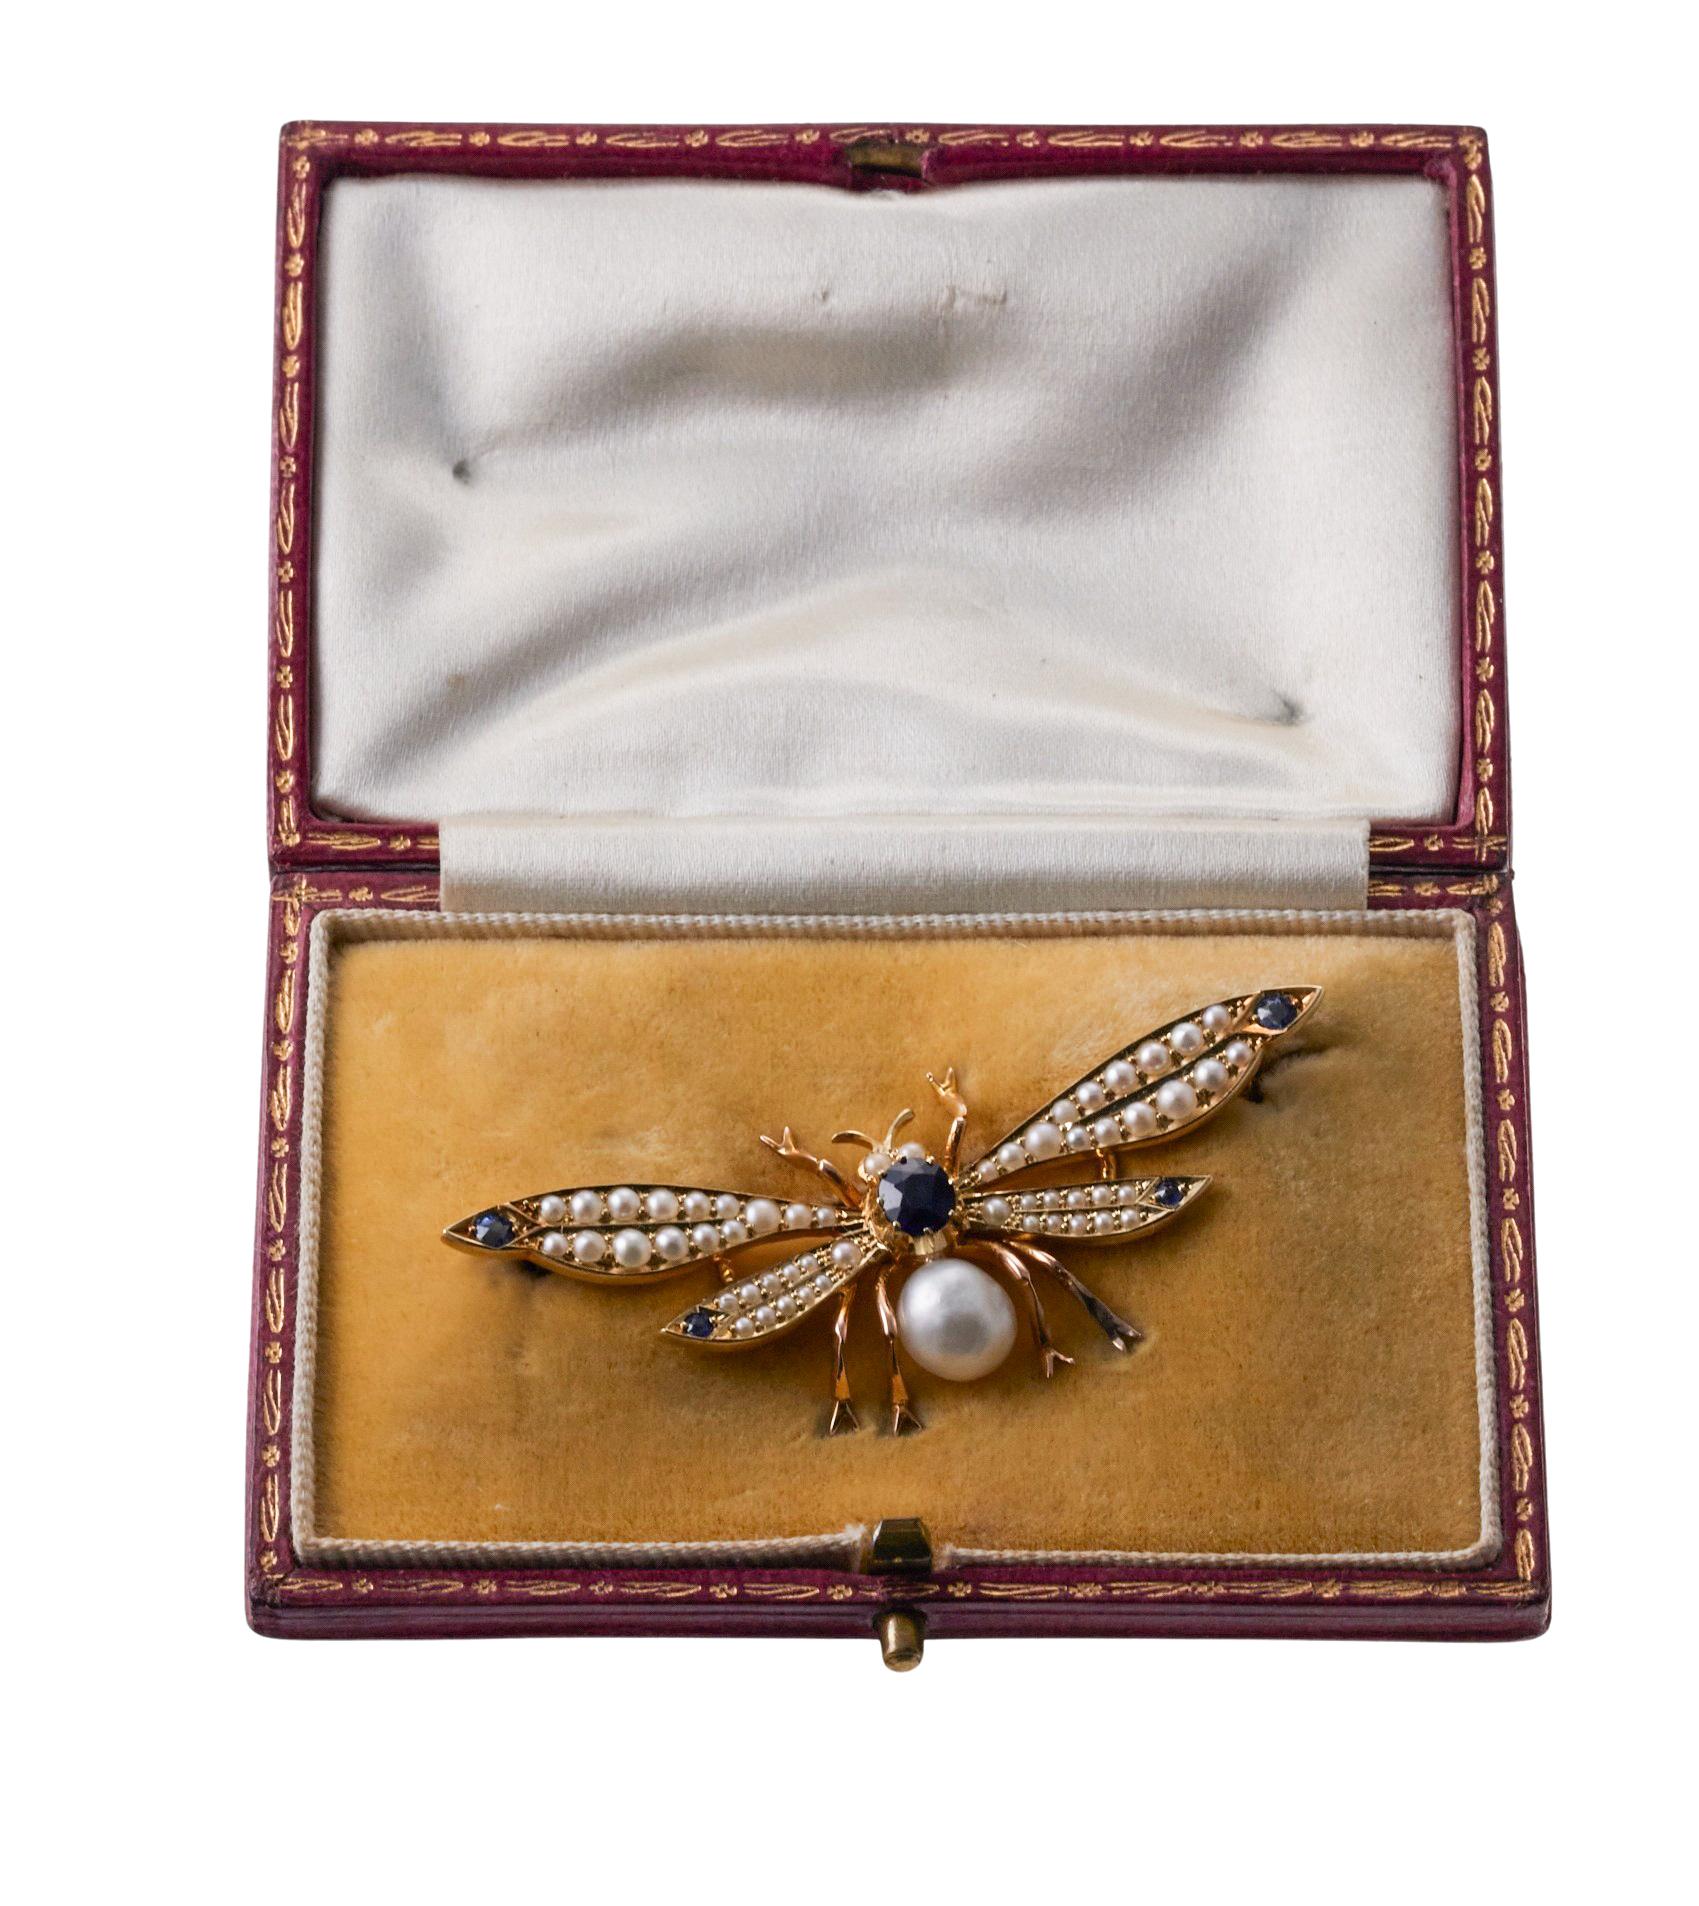 Antique 18k gold insect brooch, set with pearls and blue sapphires. The brooch measures 55mm x 22mm. Comes in original antique fitted box. Marked 750 and with scratched on numbers. Weight - 7 grams. 